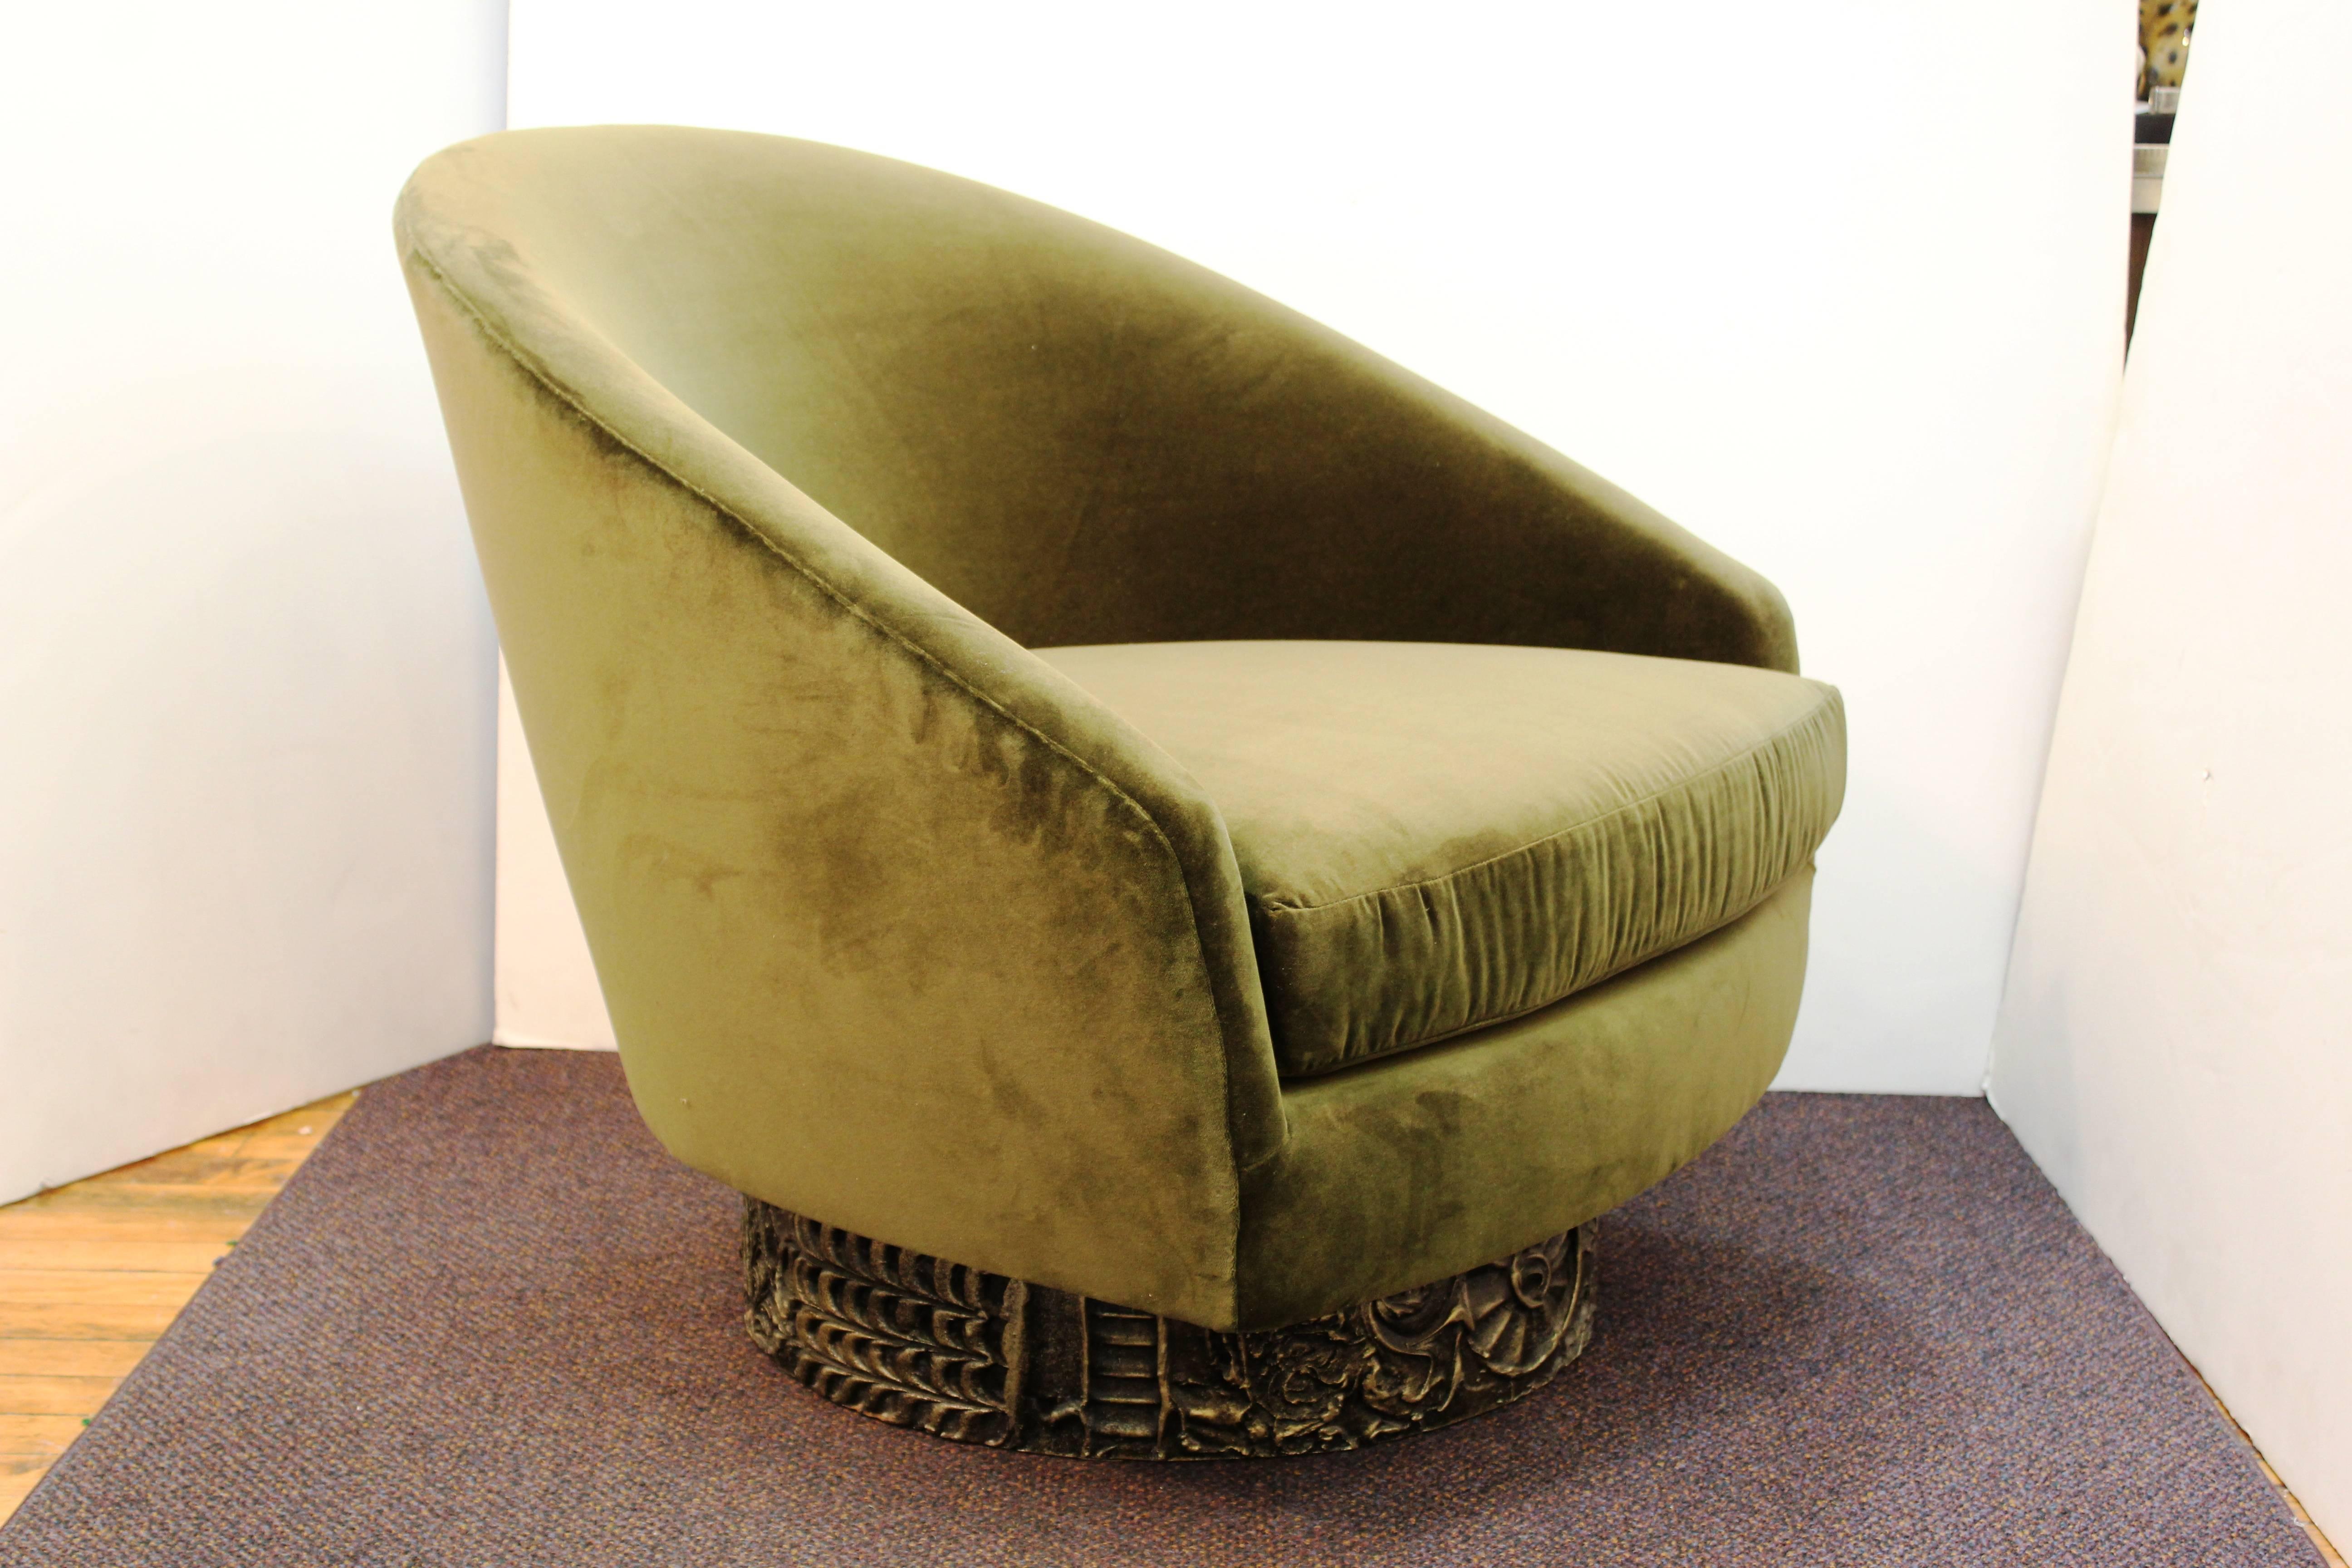 A chair by Adrian Pearsall produced during the 1970s. The cast resin base that is highlighted in gold allows the chair to swivel and rock. The chair has been recently re-upholstered in velvet and remains in excellent condition.